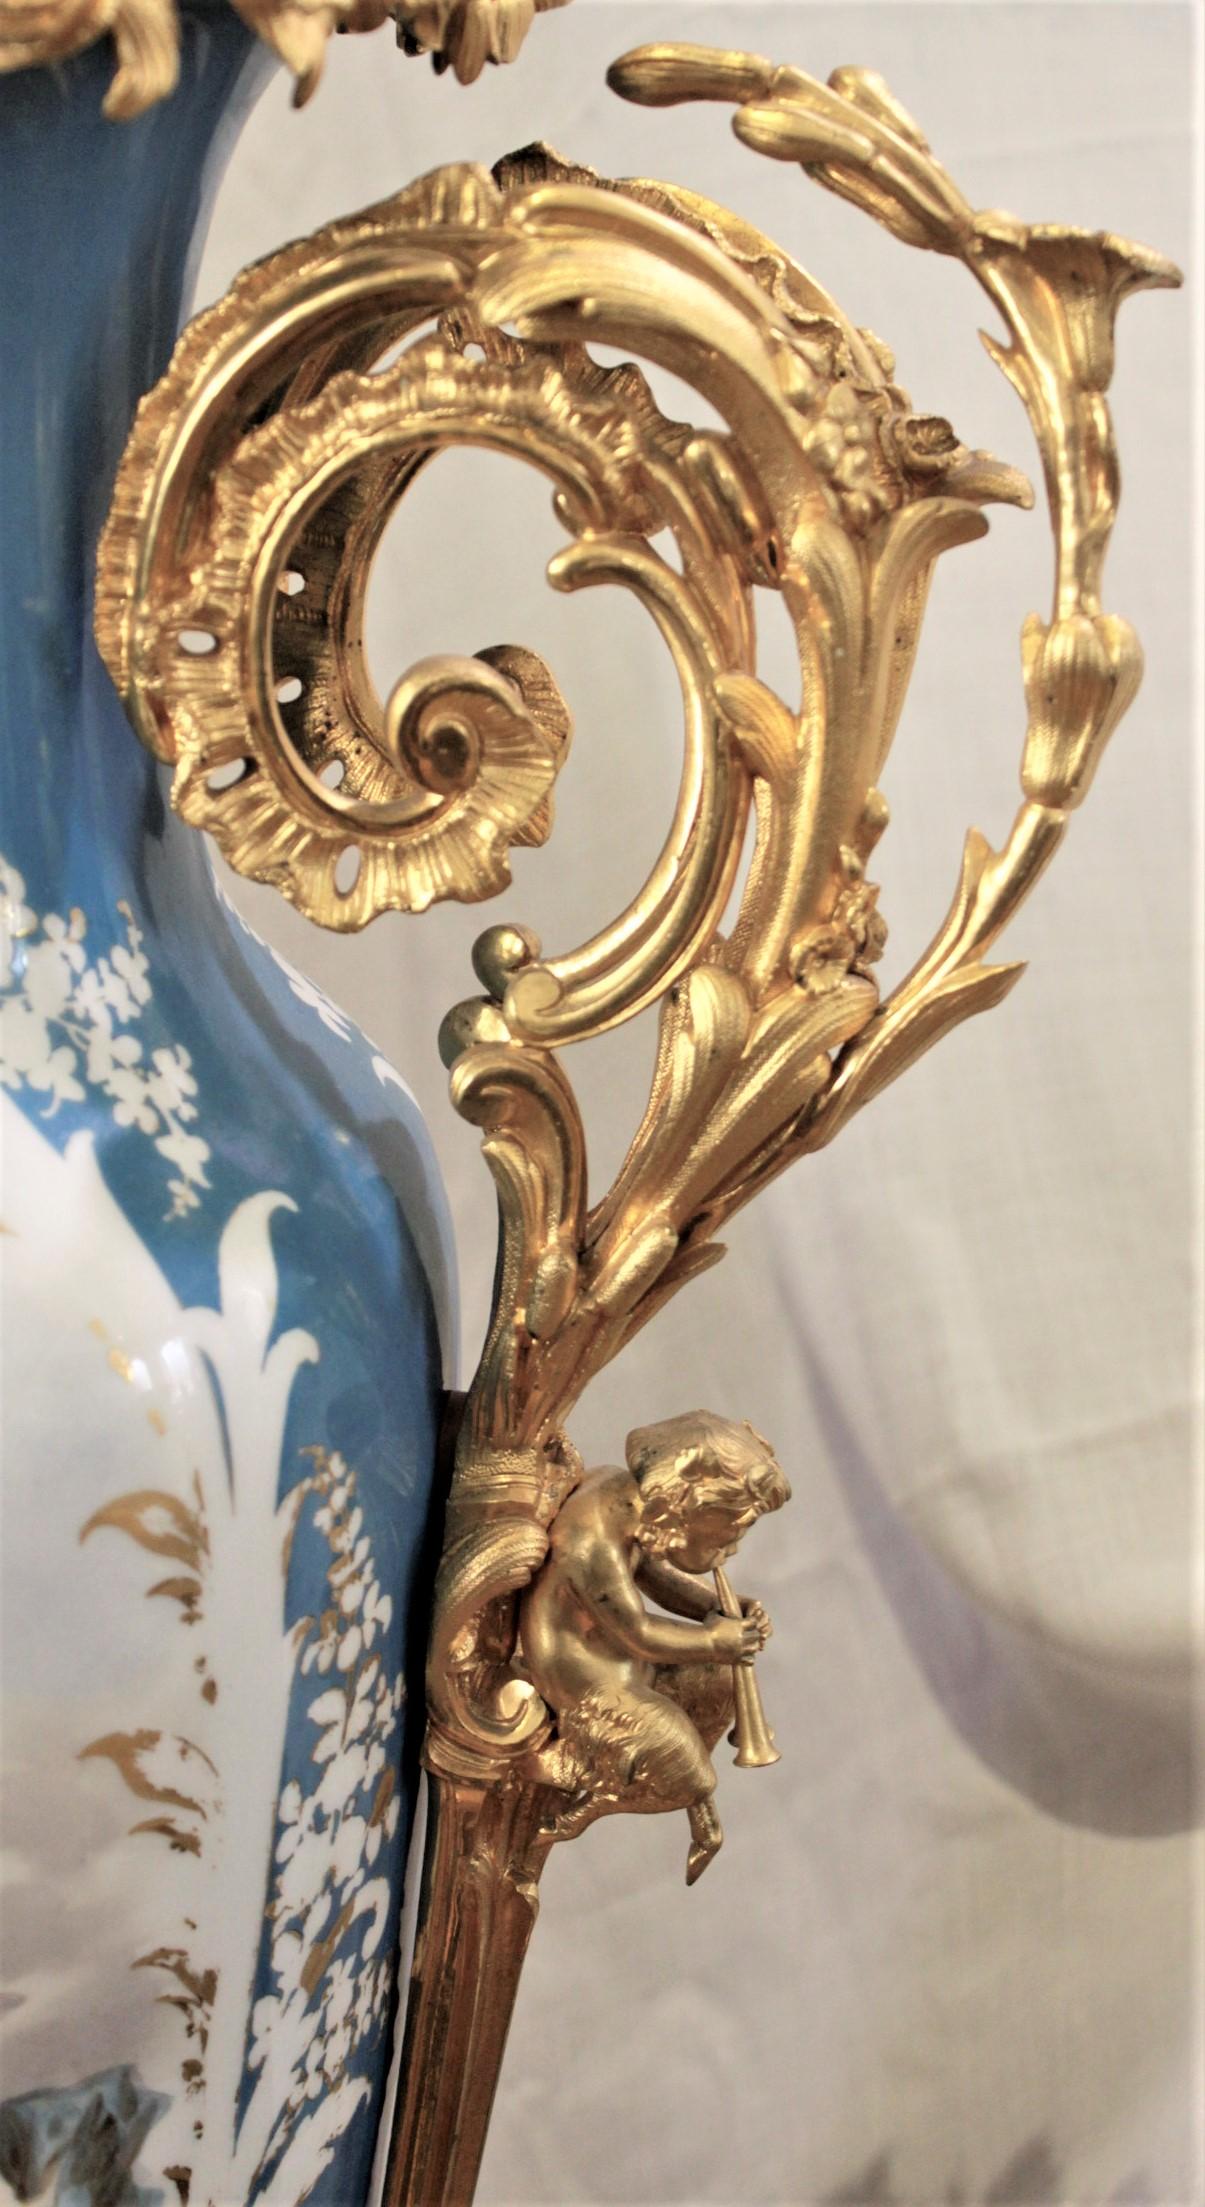 Large Antique Sevres Styled Hand-Painted Porcelain Vase with Gilt Bronze Mounts For Sale 3